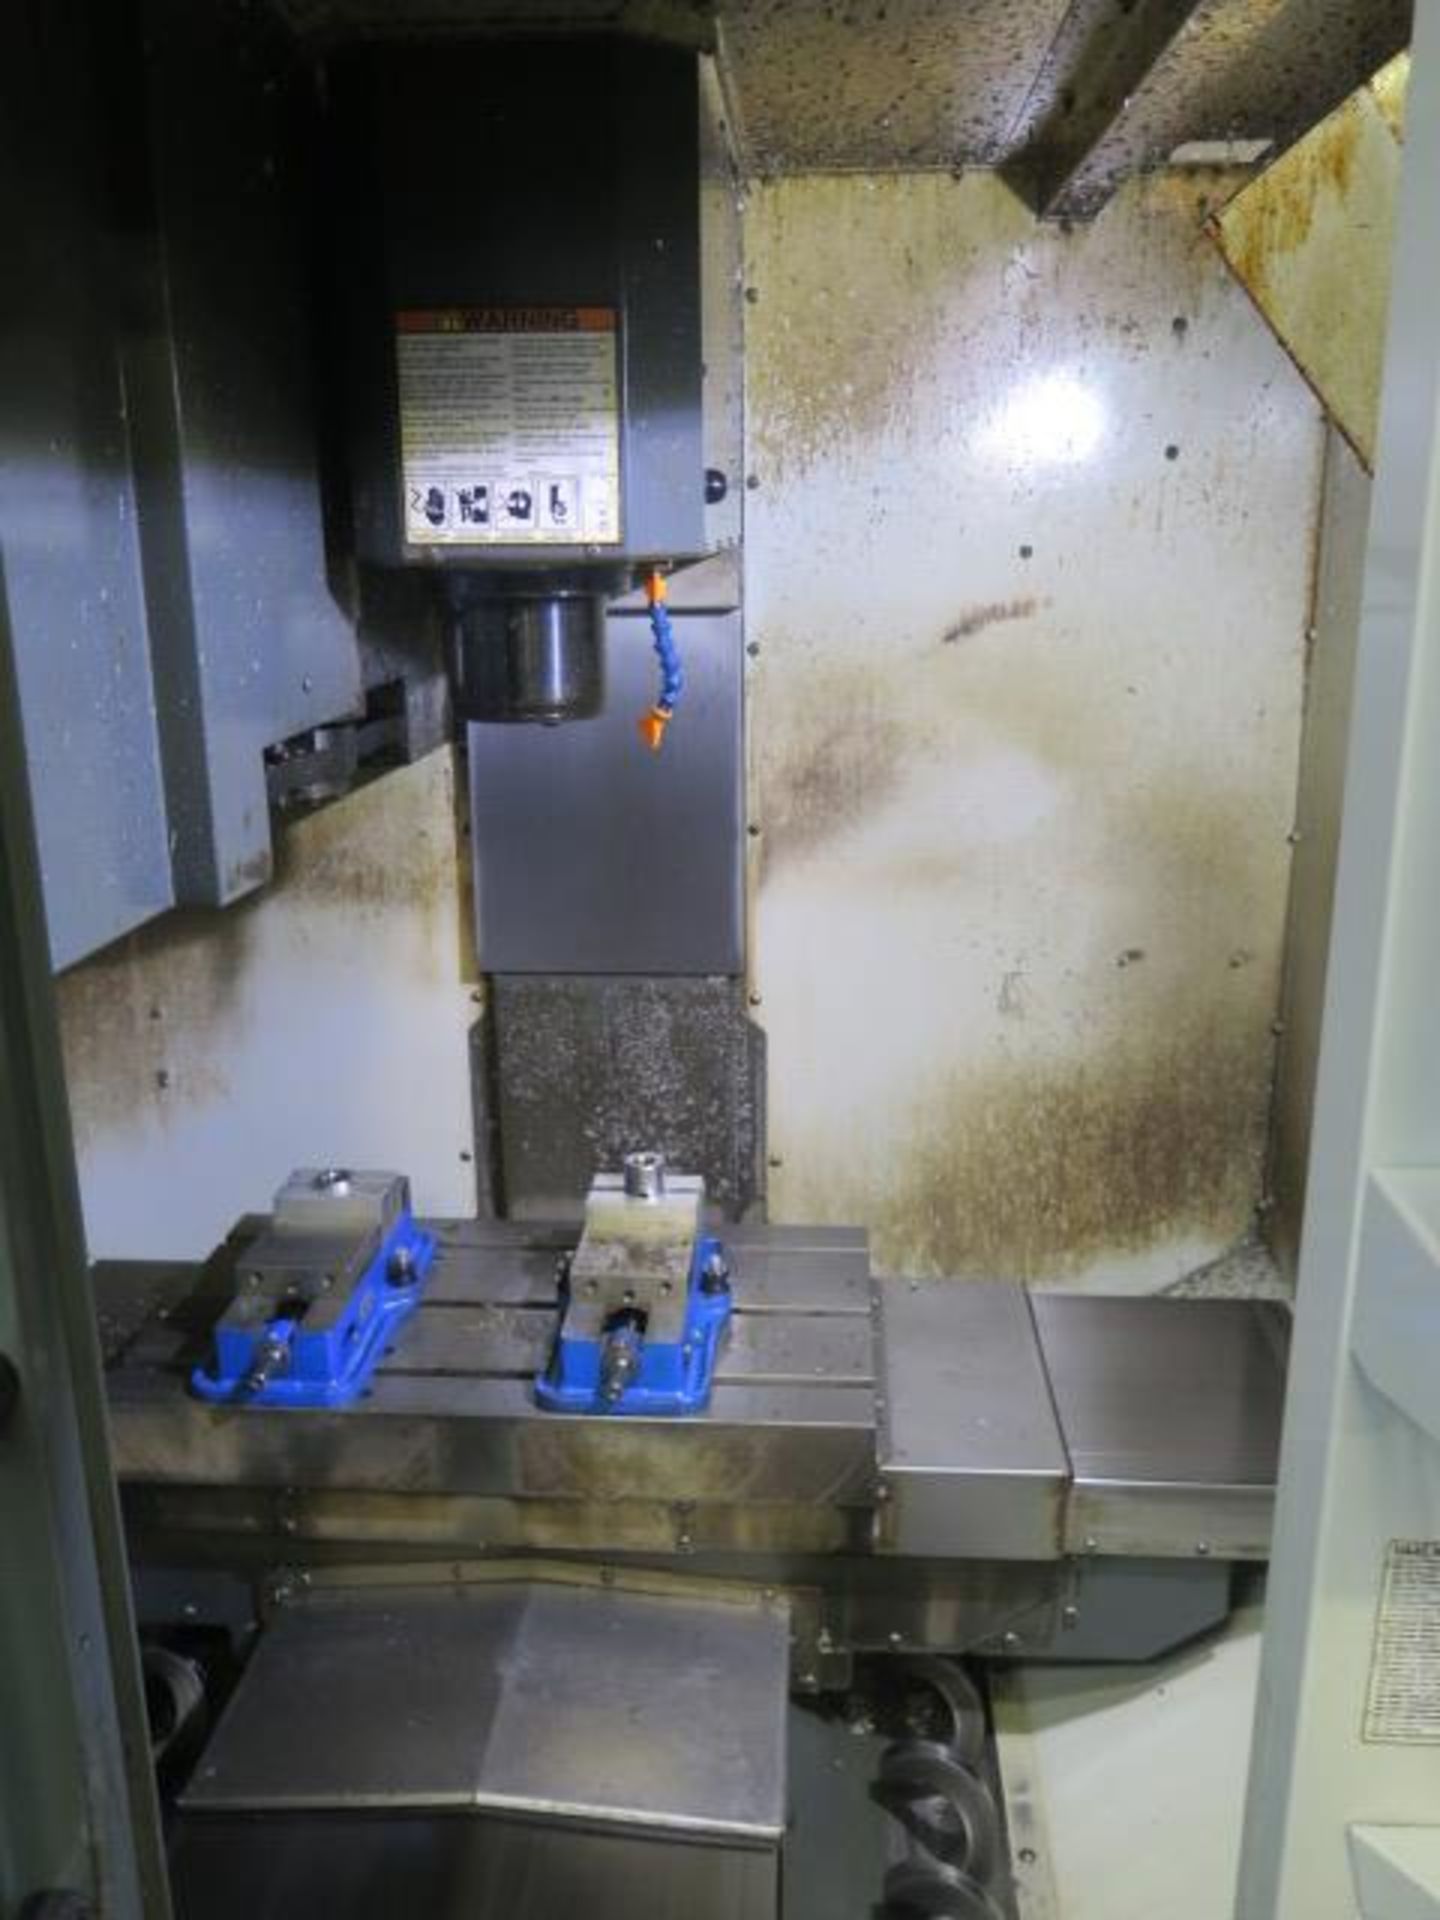 DEC/2014 Haas DT-1 CNC VMC s/n 1118934 w/ Haas Controls, 20-Station ATC, BT-30, SOLD AS IS - Image 4 of 16